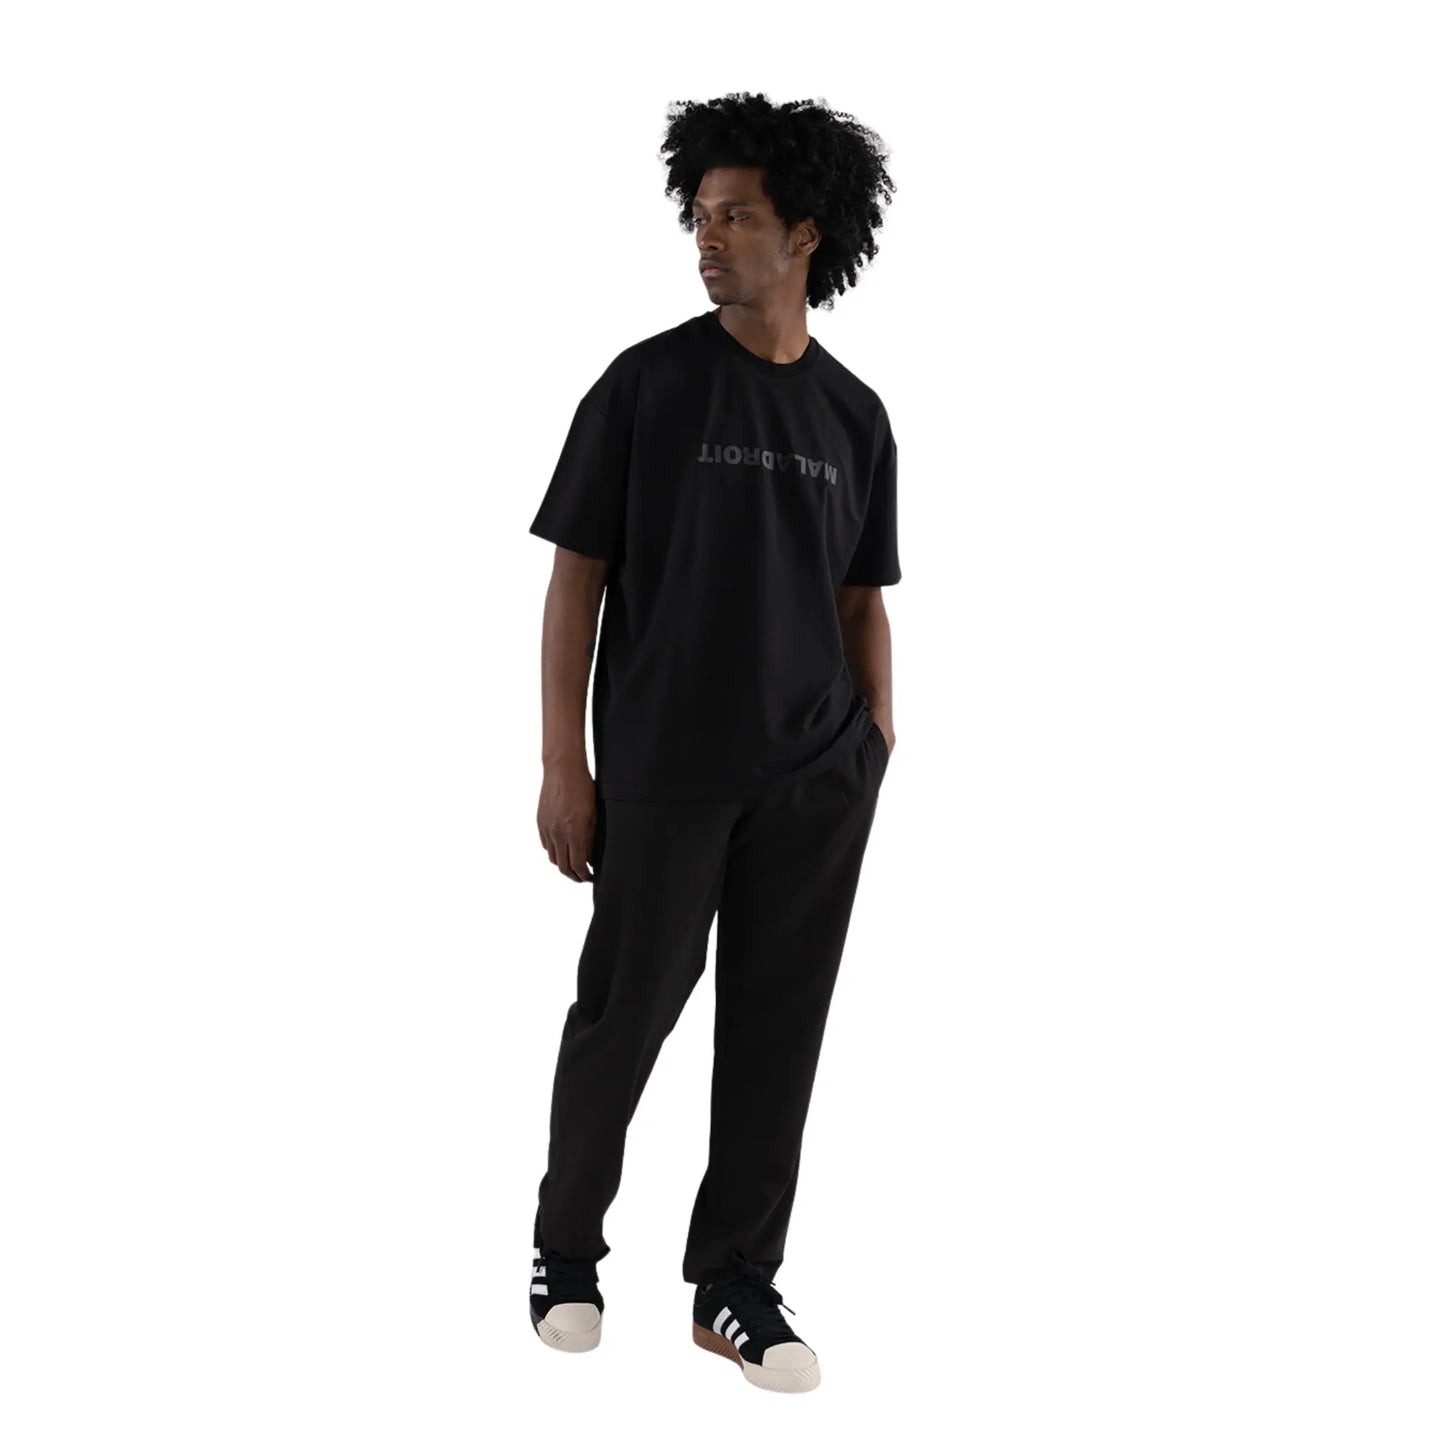 LES MALADROITS Oversized T-Shirt Black Maladroits Reversed front view